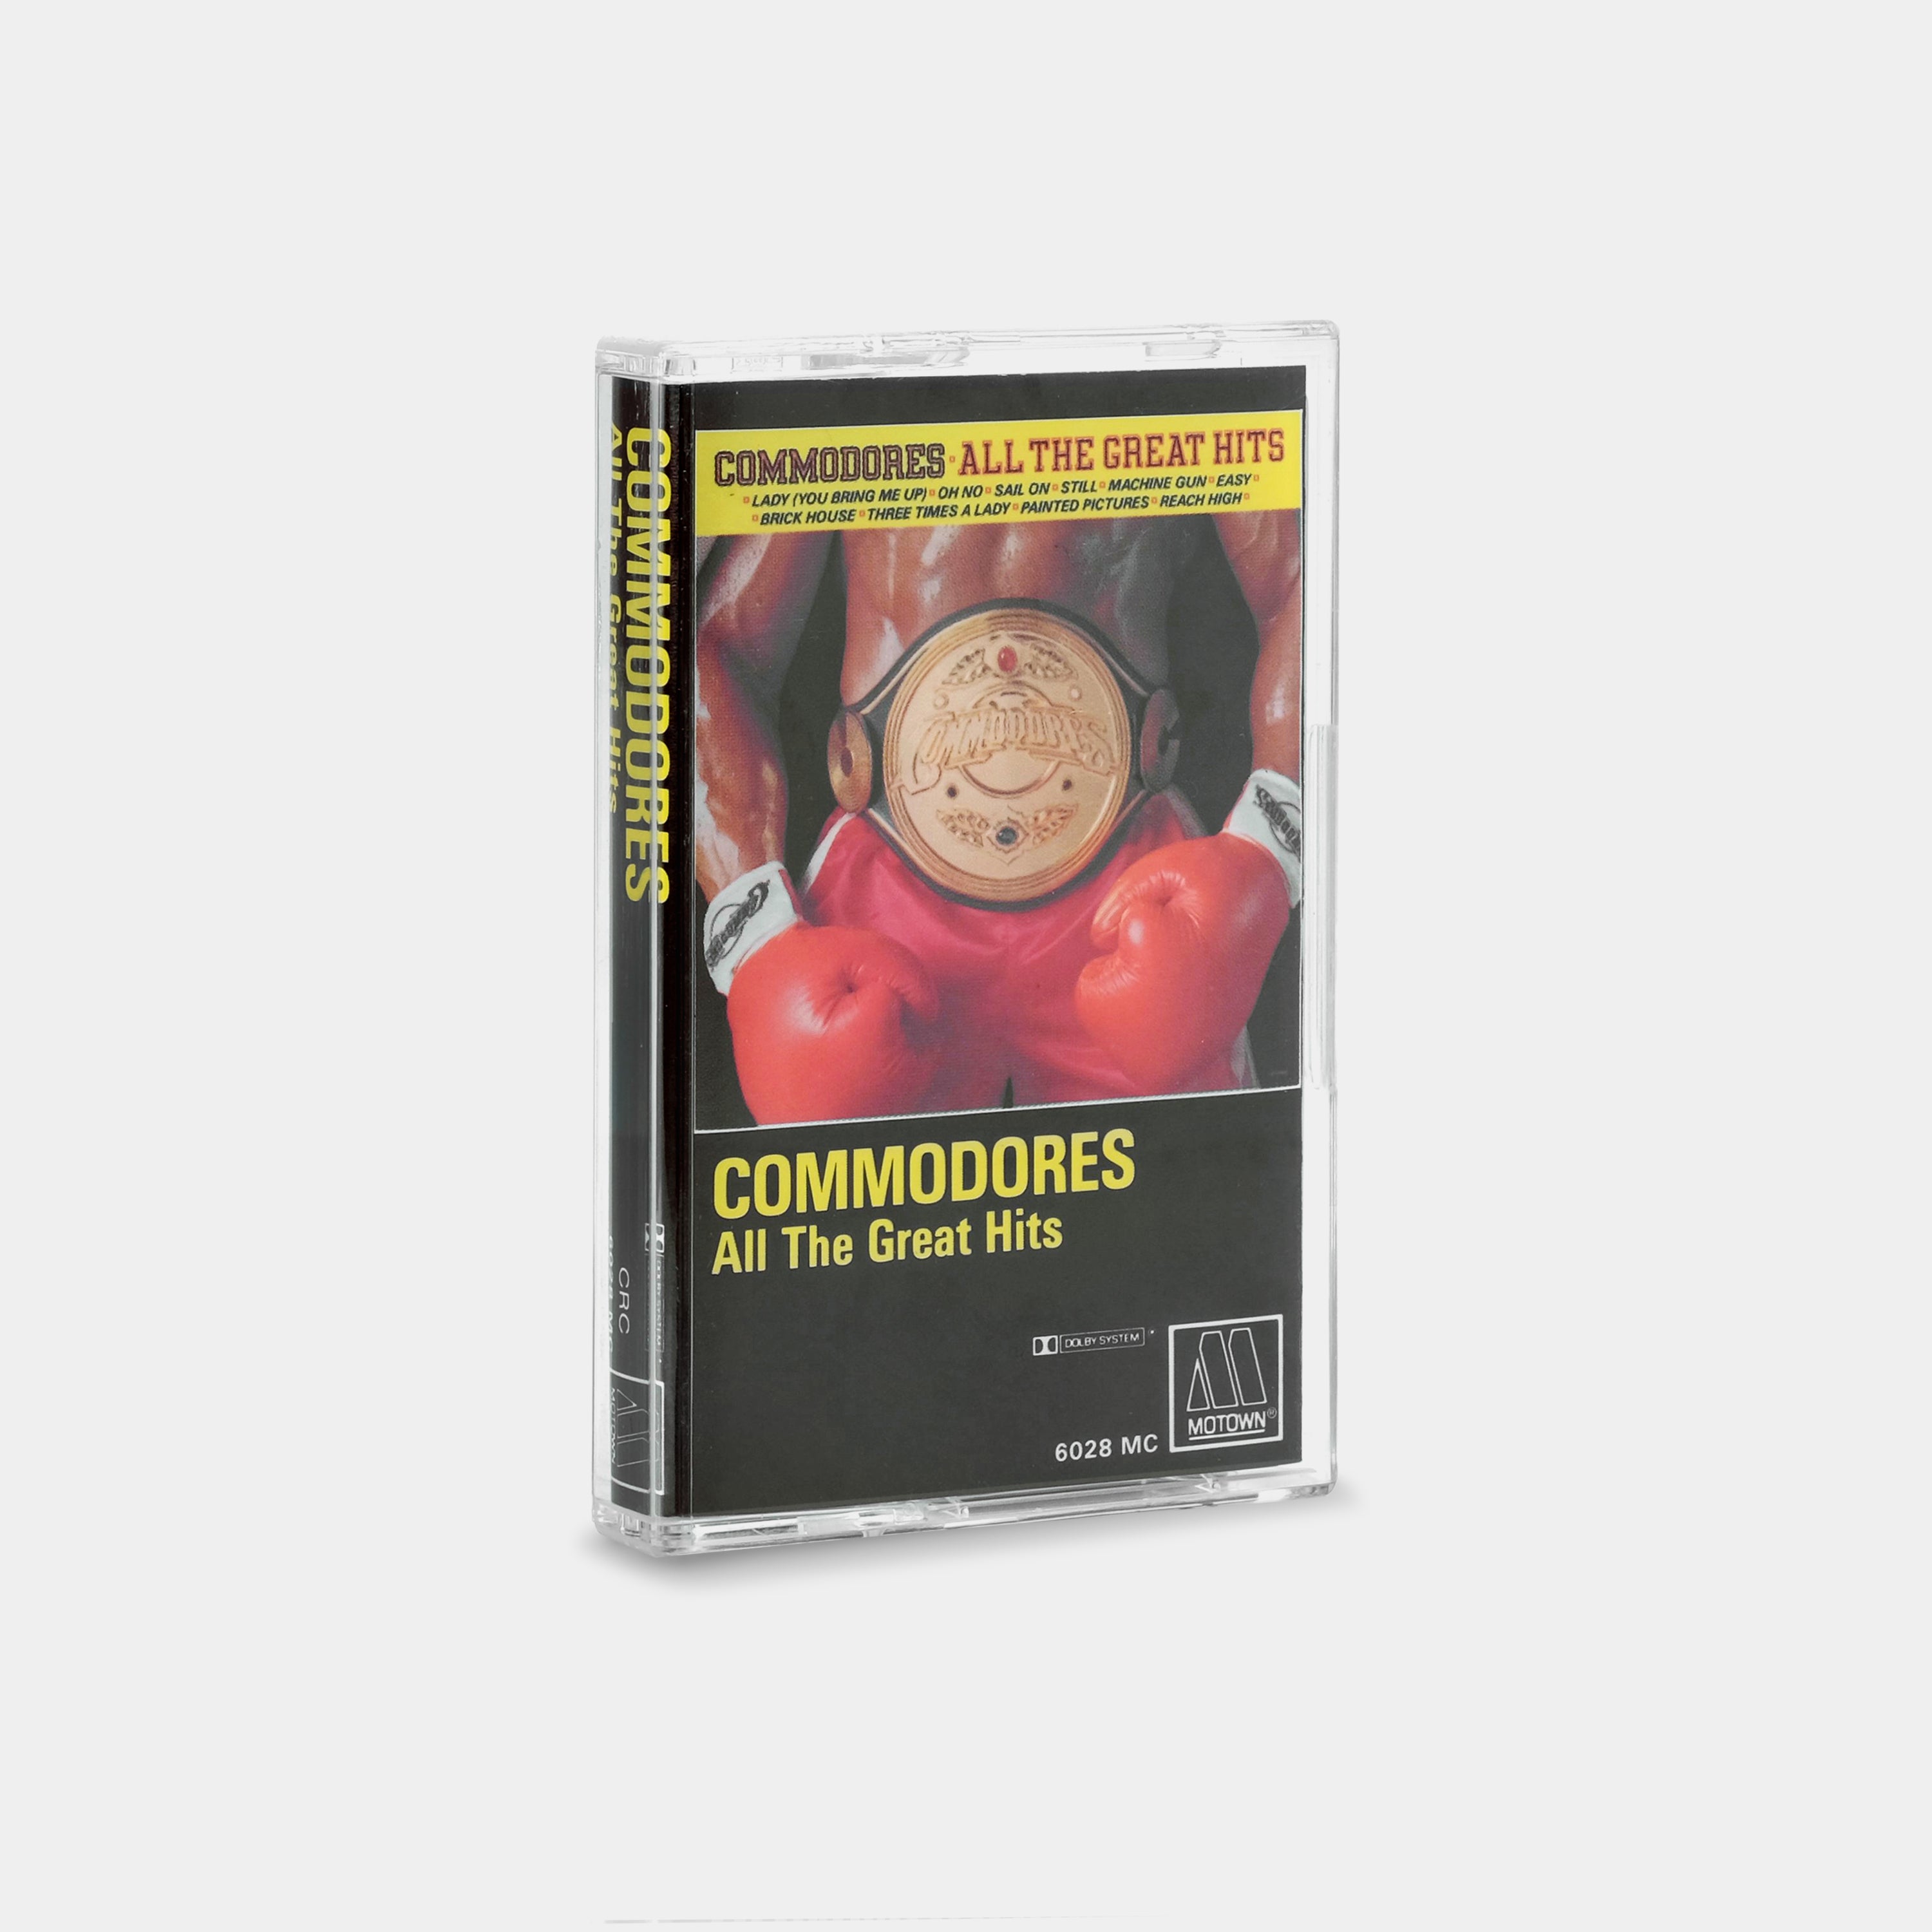 Commodores - All The Great Hits Cassette Tape